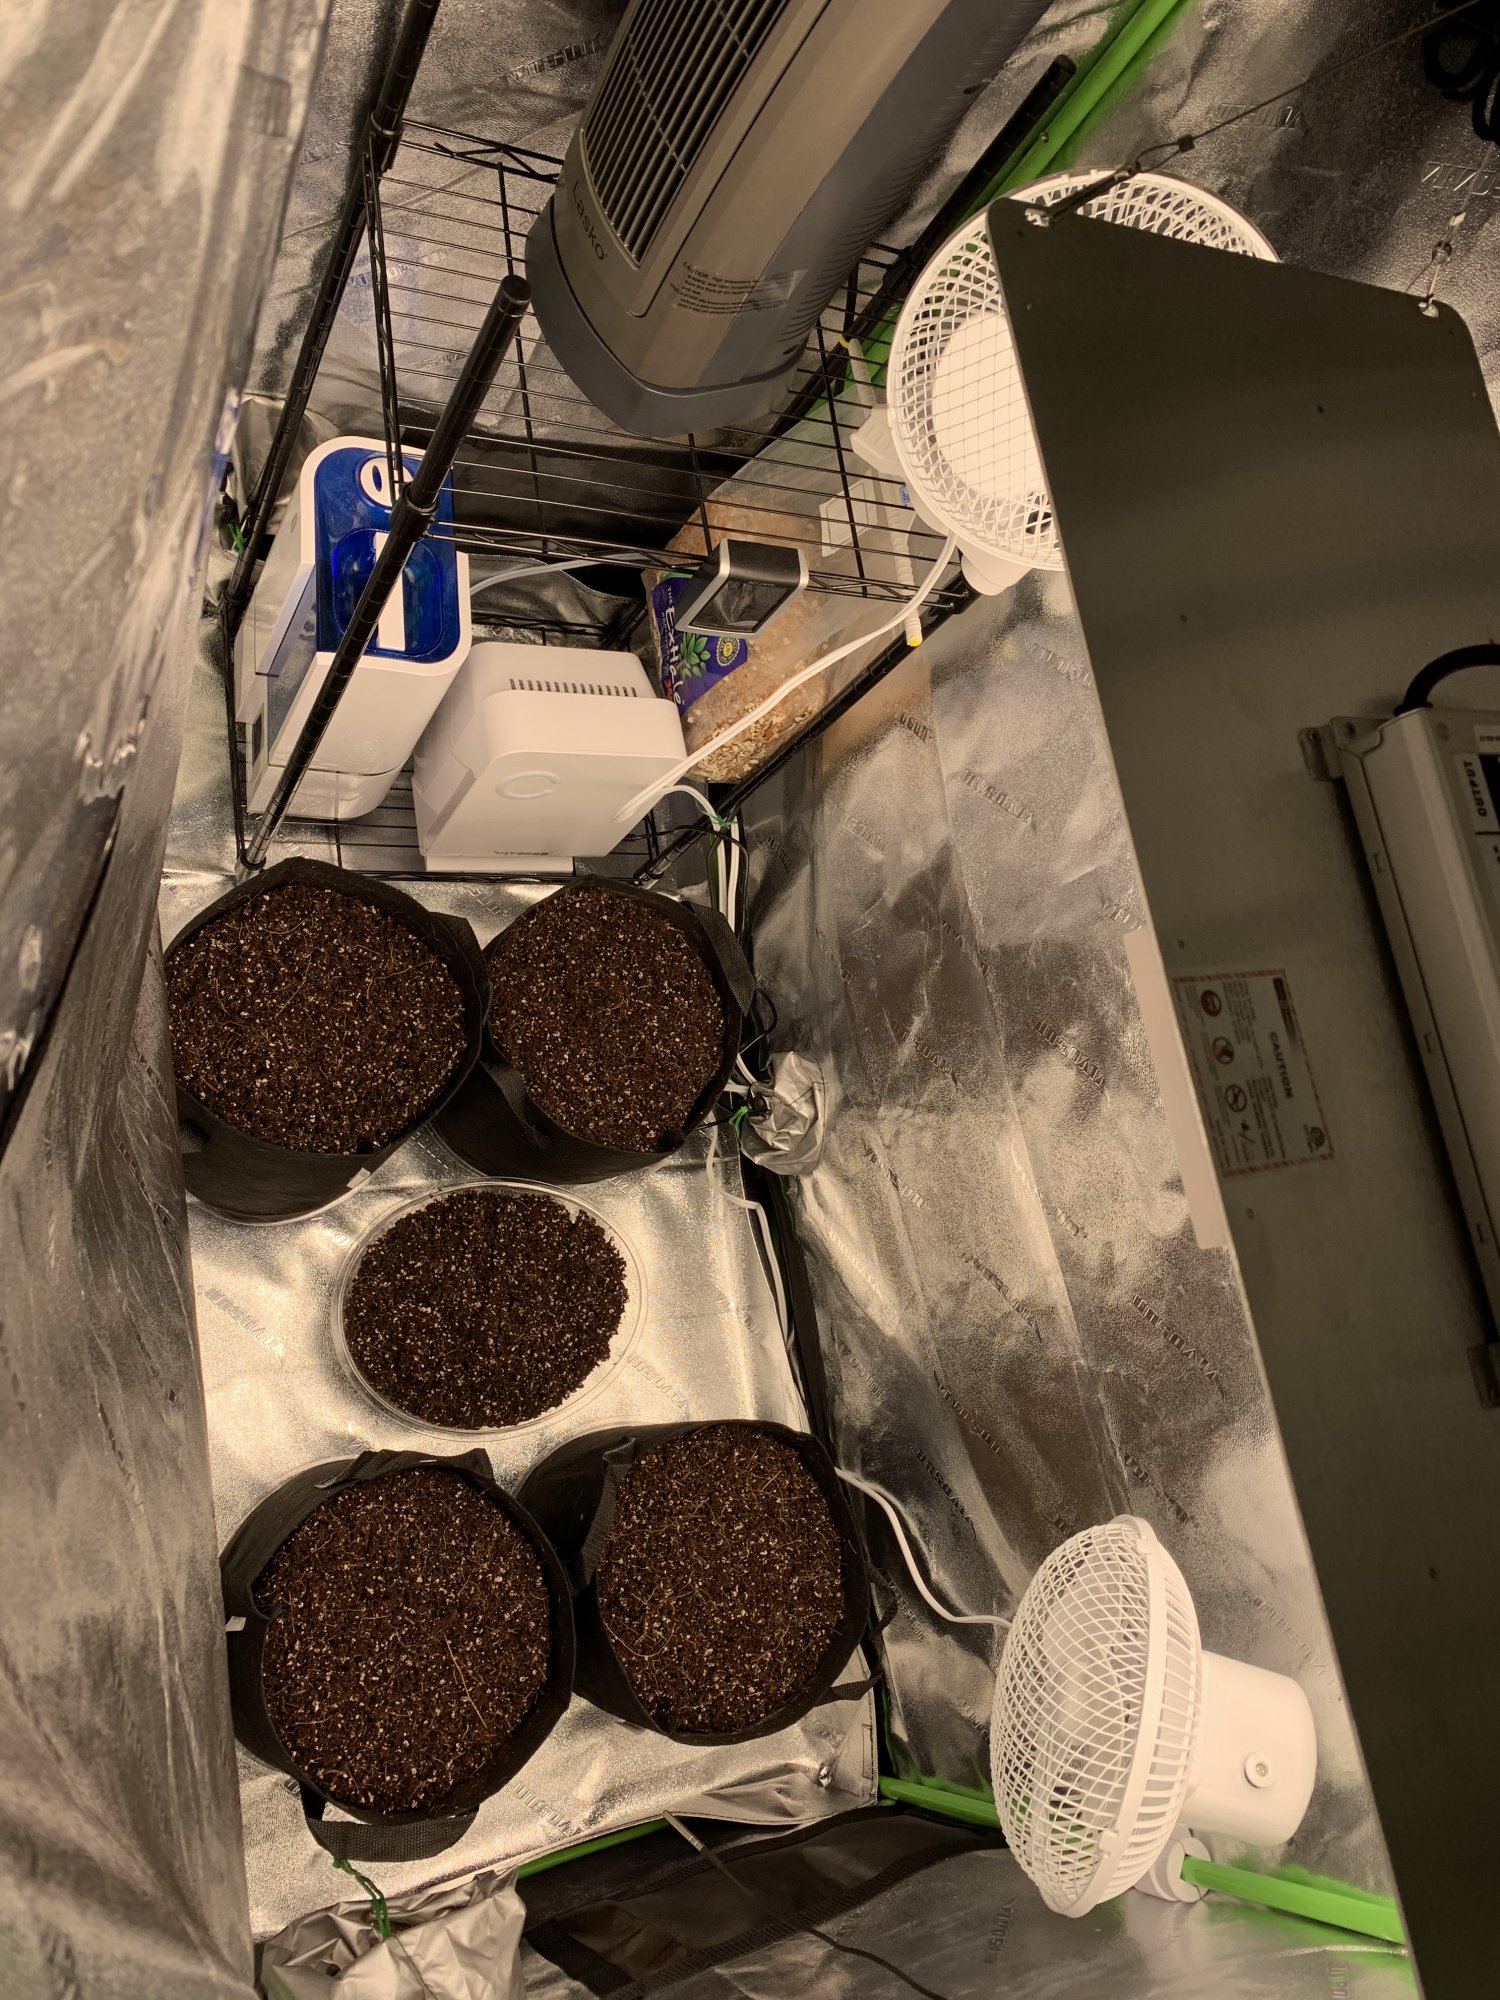 1st grow with coco coir id love advice about nutrients 2